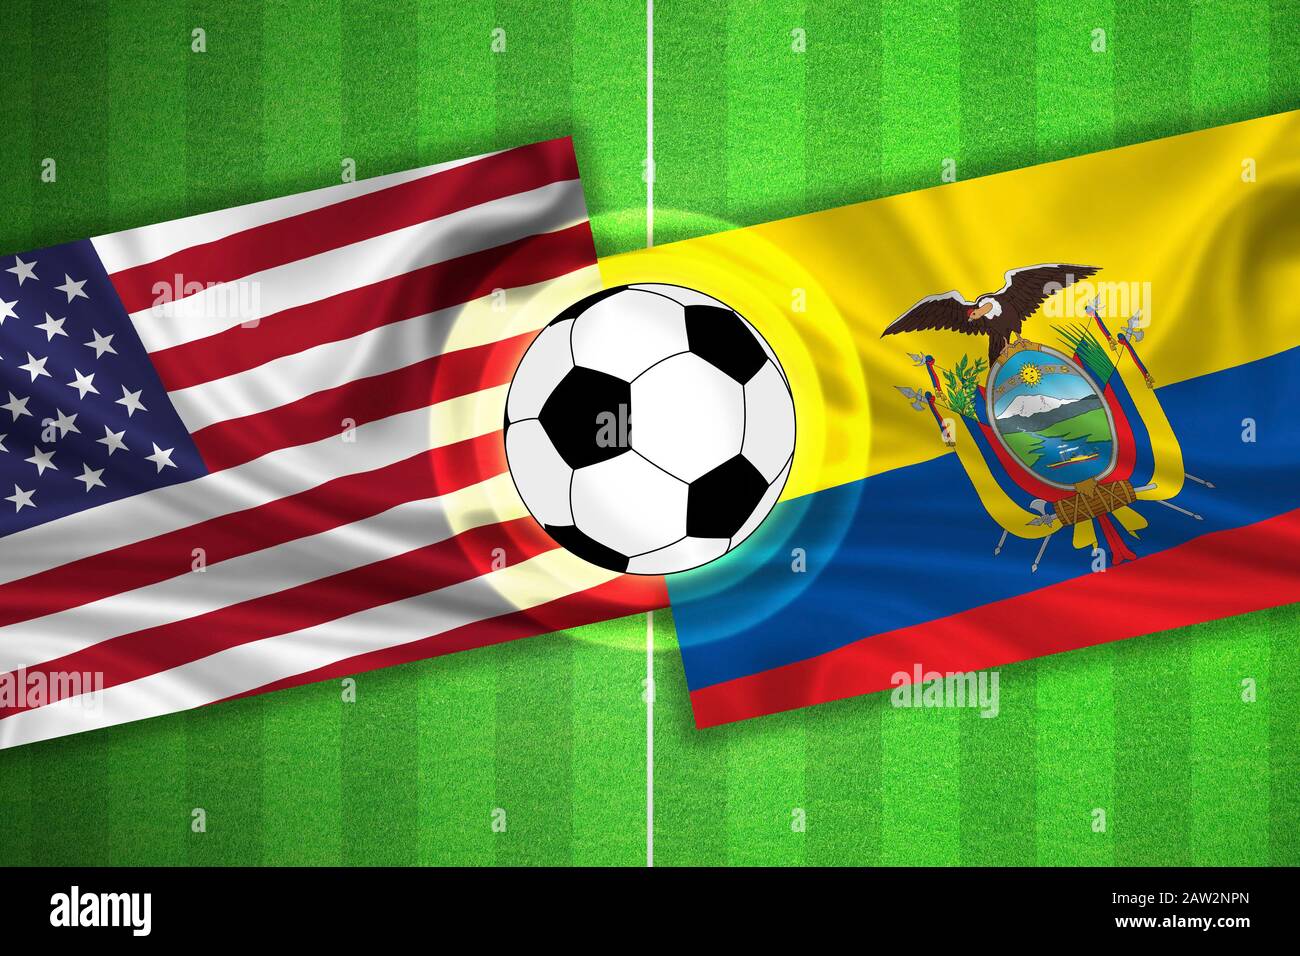 green Soccer / Football field with stripes and flags of usa / america - ecuador, and ball. Stock Photo